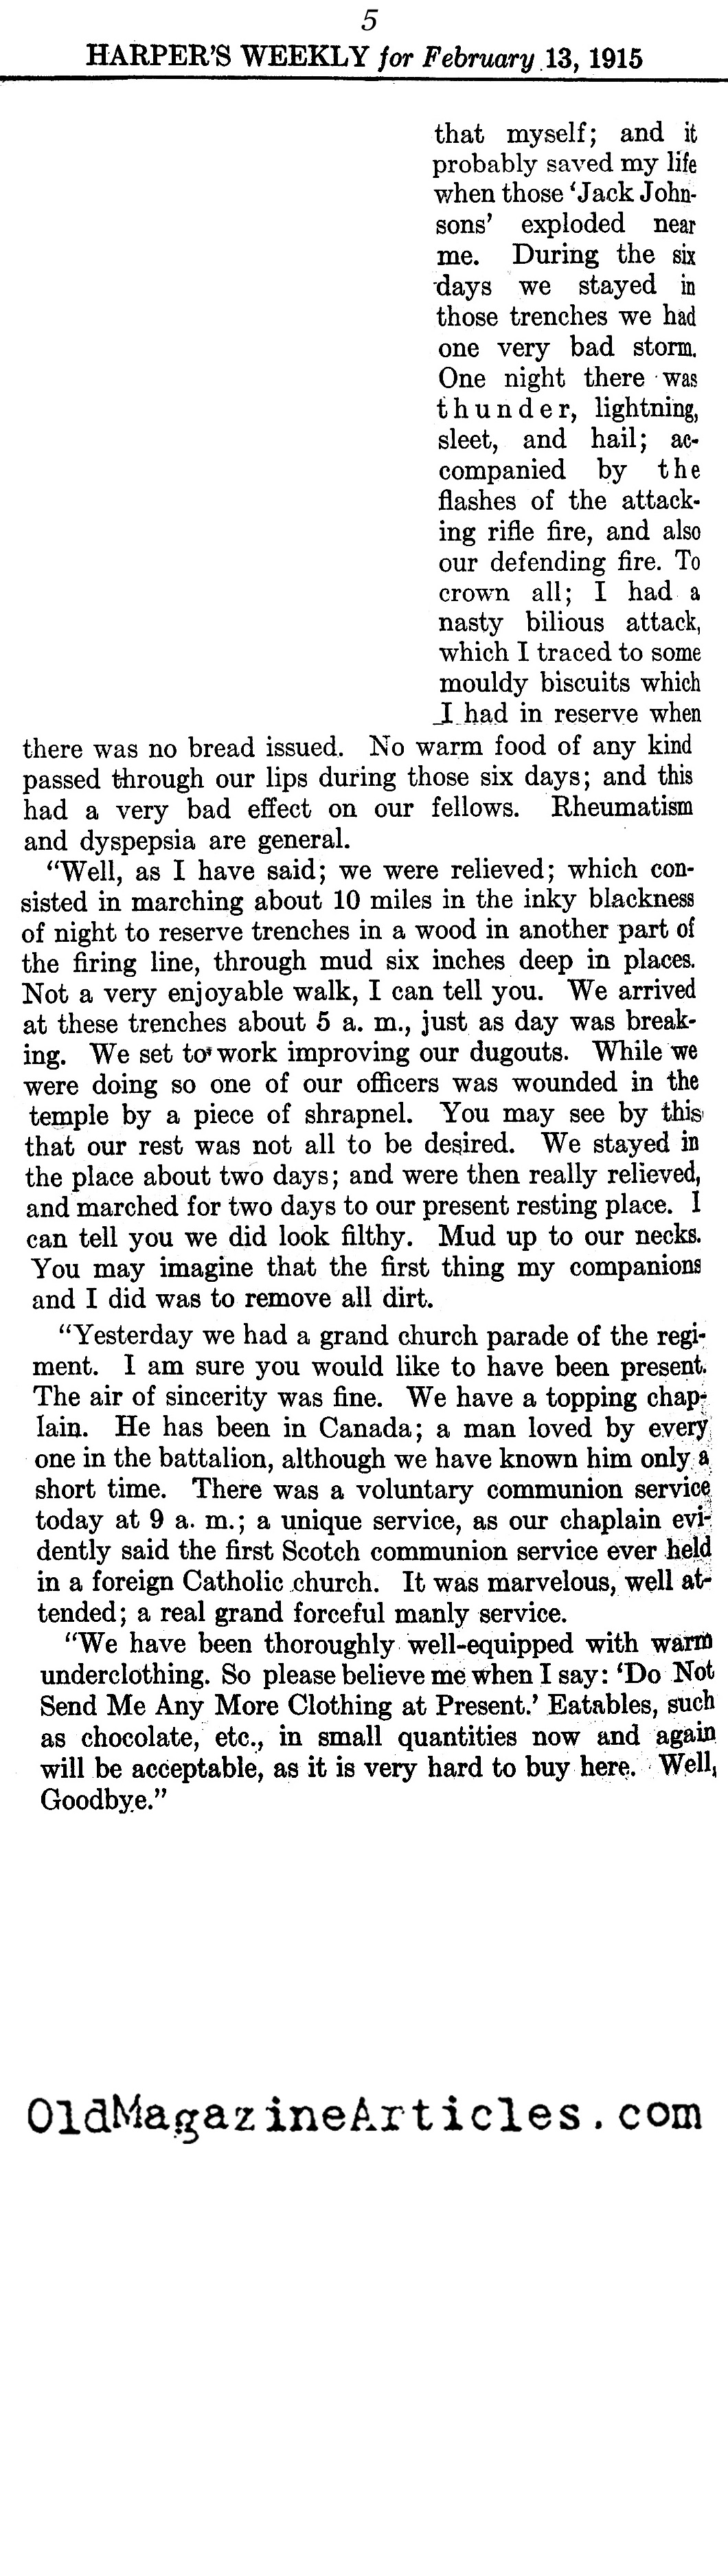 A Briton Writes From Ypres (Harper's Weekly, 1915)